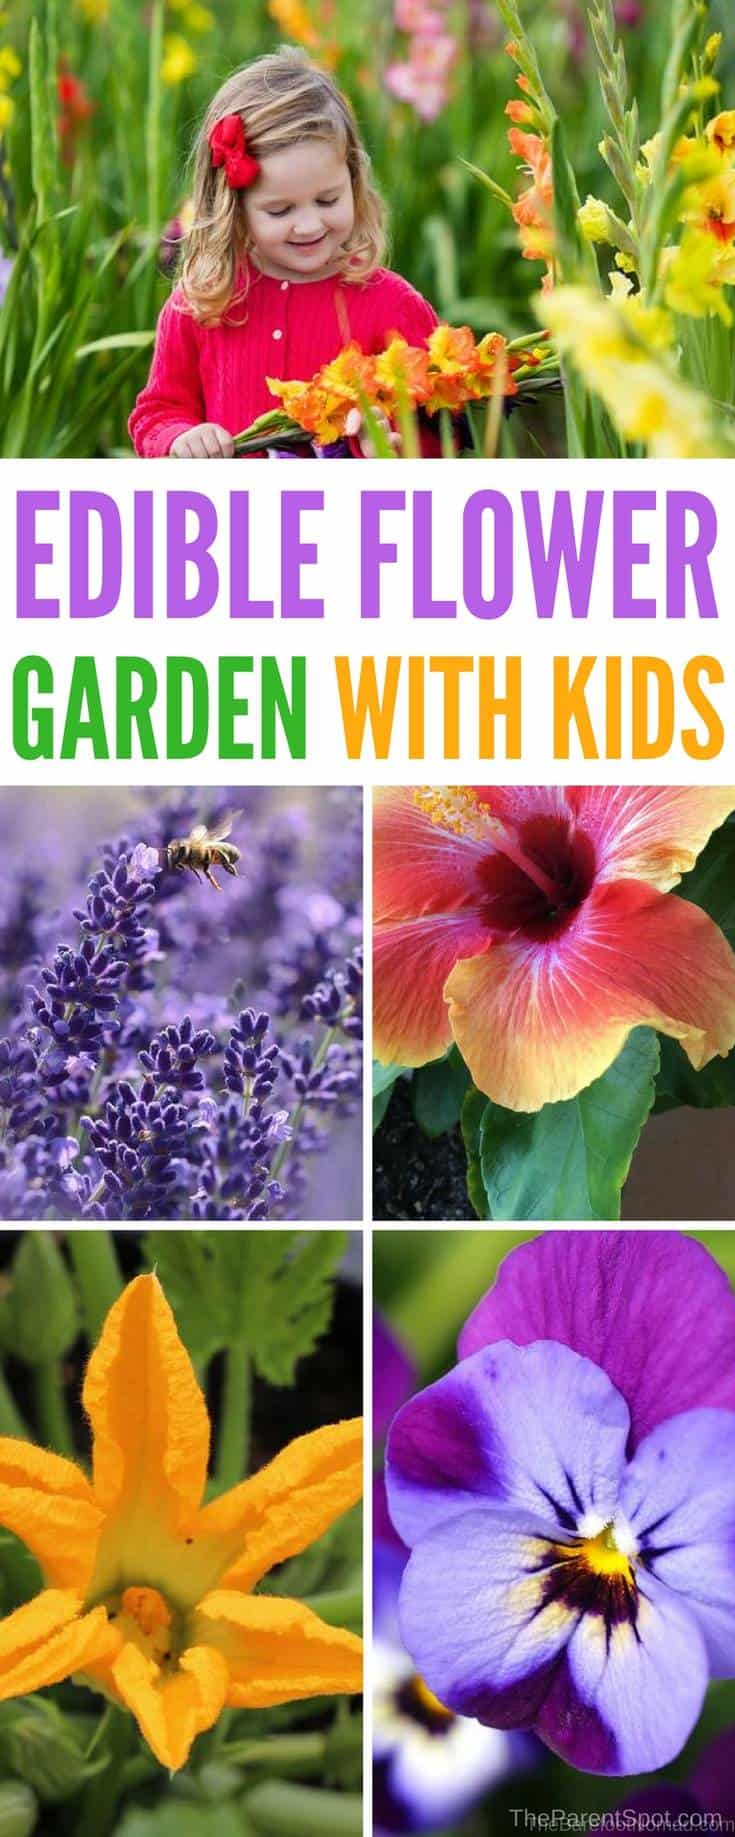 want to have some fun growing edible flowers with your kids? Try this easy kids flower garden! You can eat the results! #gardeningtips